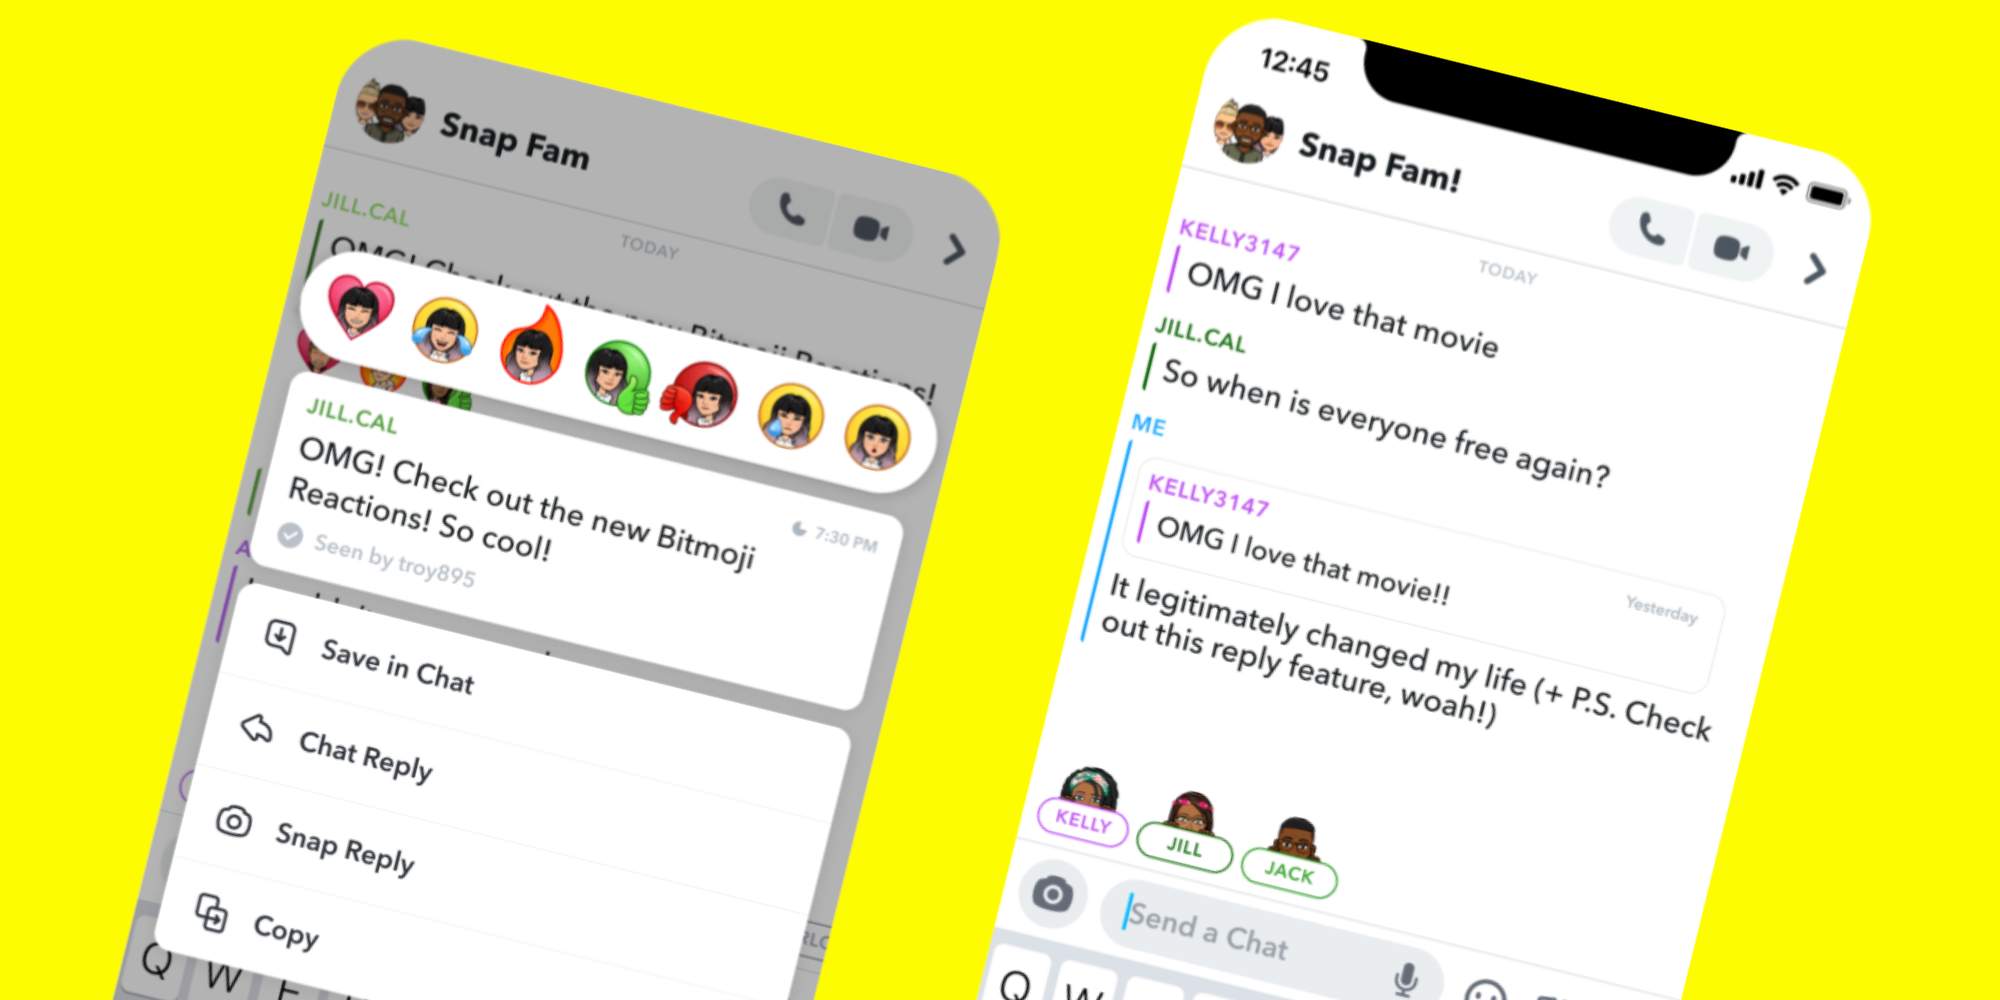 Bitmoji Reactions and Chat Reply in Snapchat